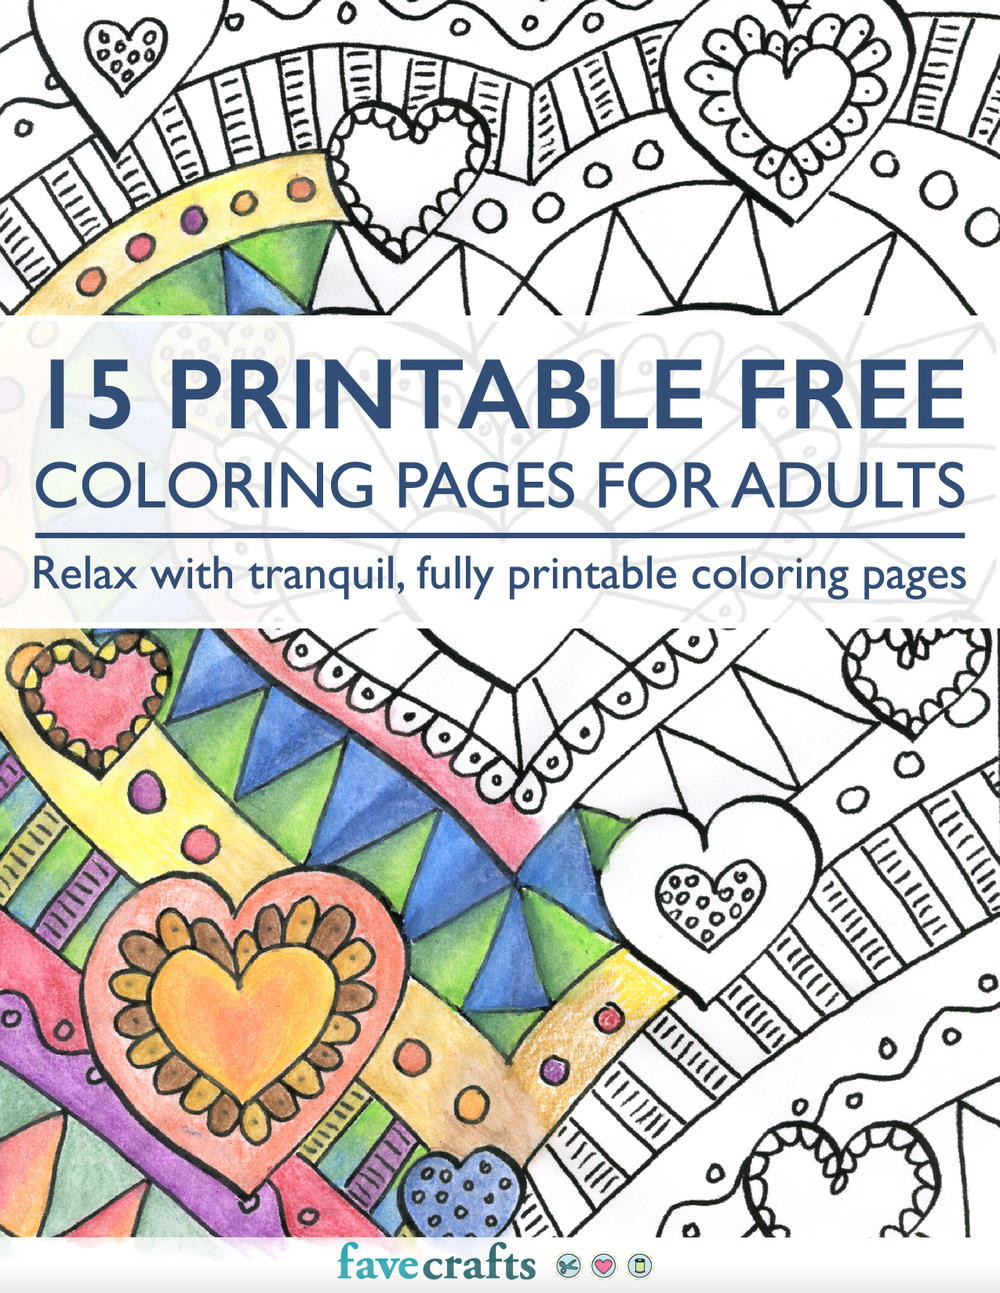 Printable Coloring Pages For Adults
 15 Printable Free Coloring Pages for Adults free eBook